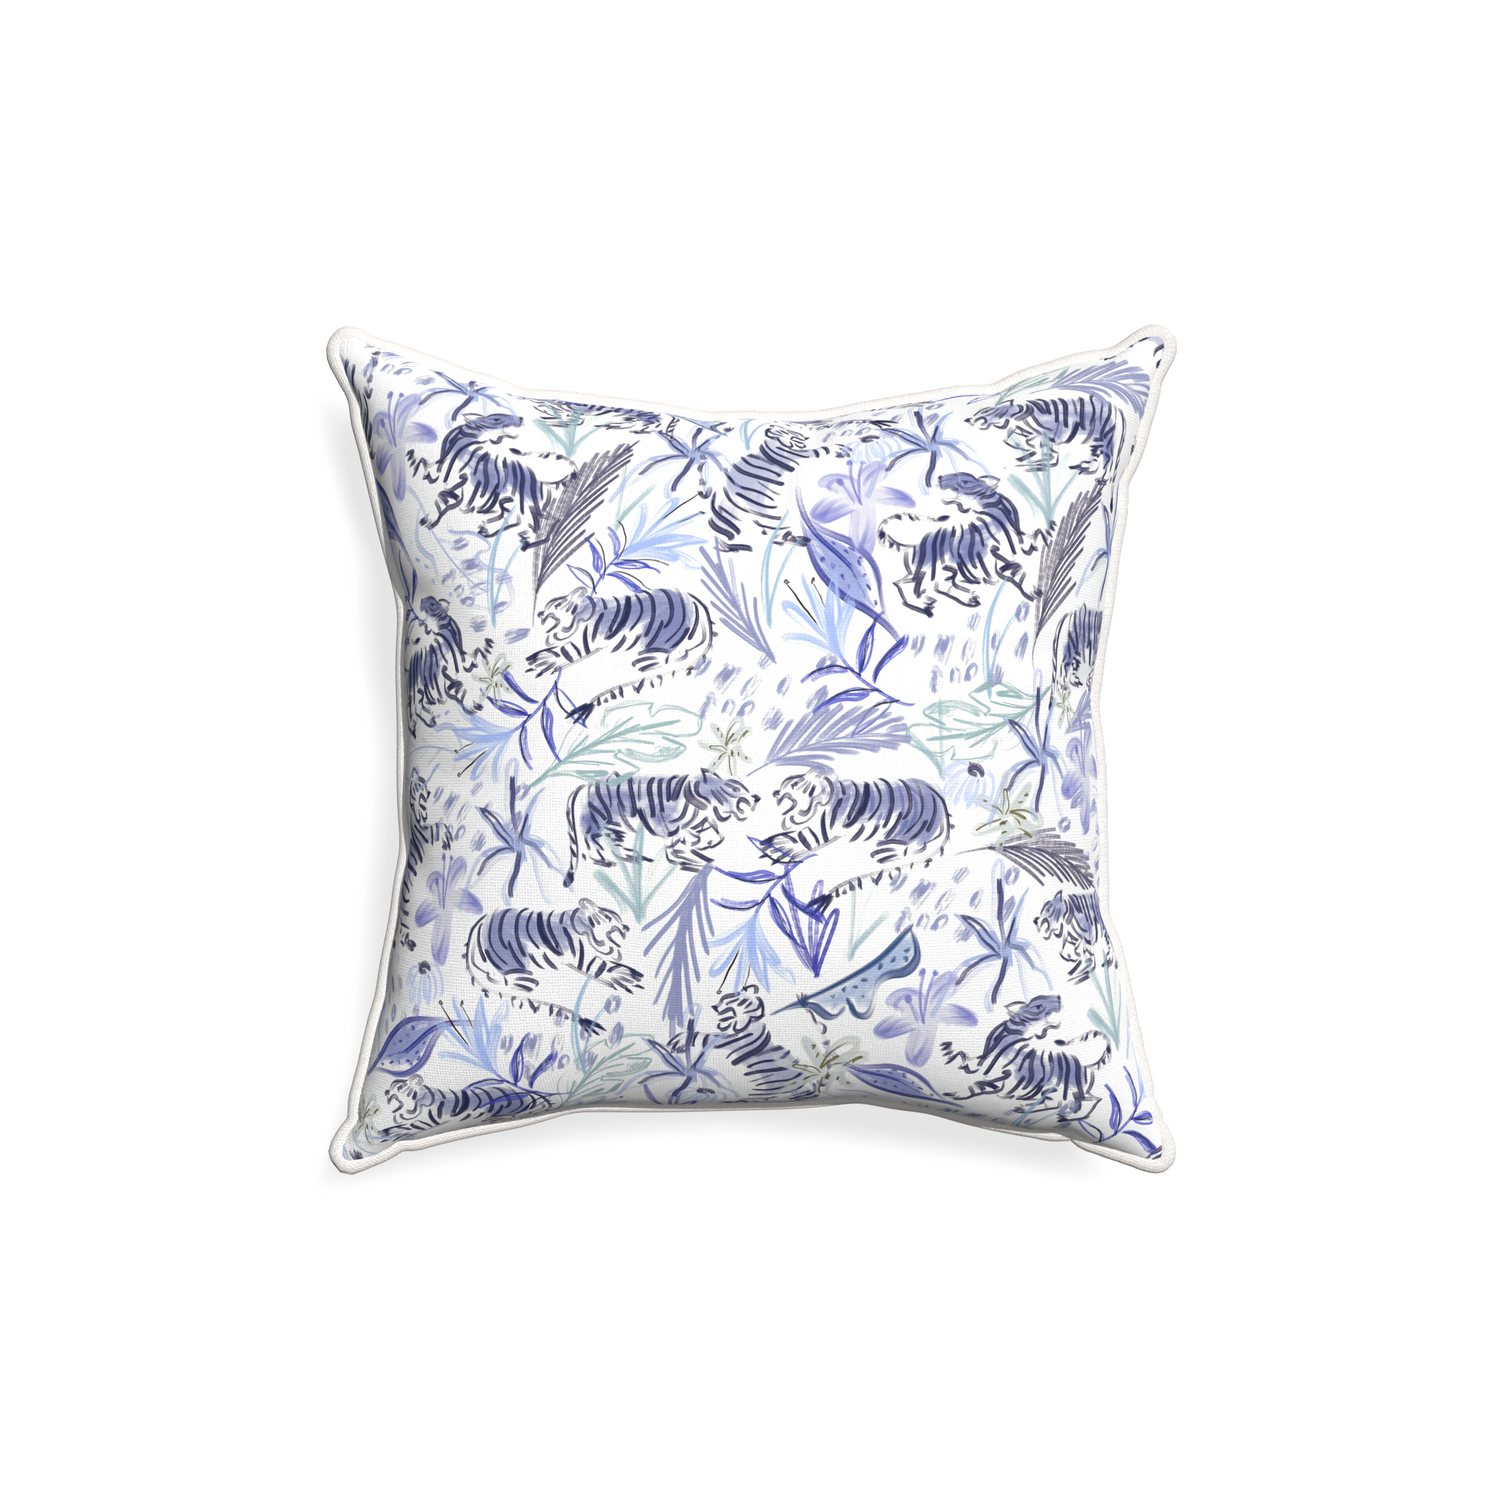 18-square frida blue custom blue with intricate tiger designpillow with snow piping on white background